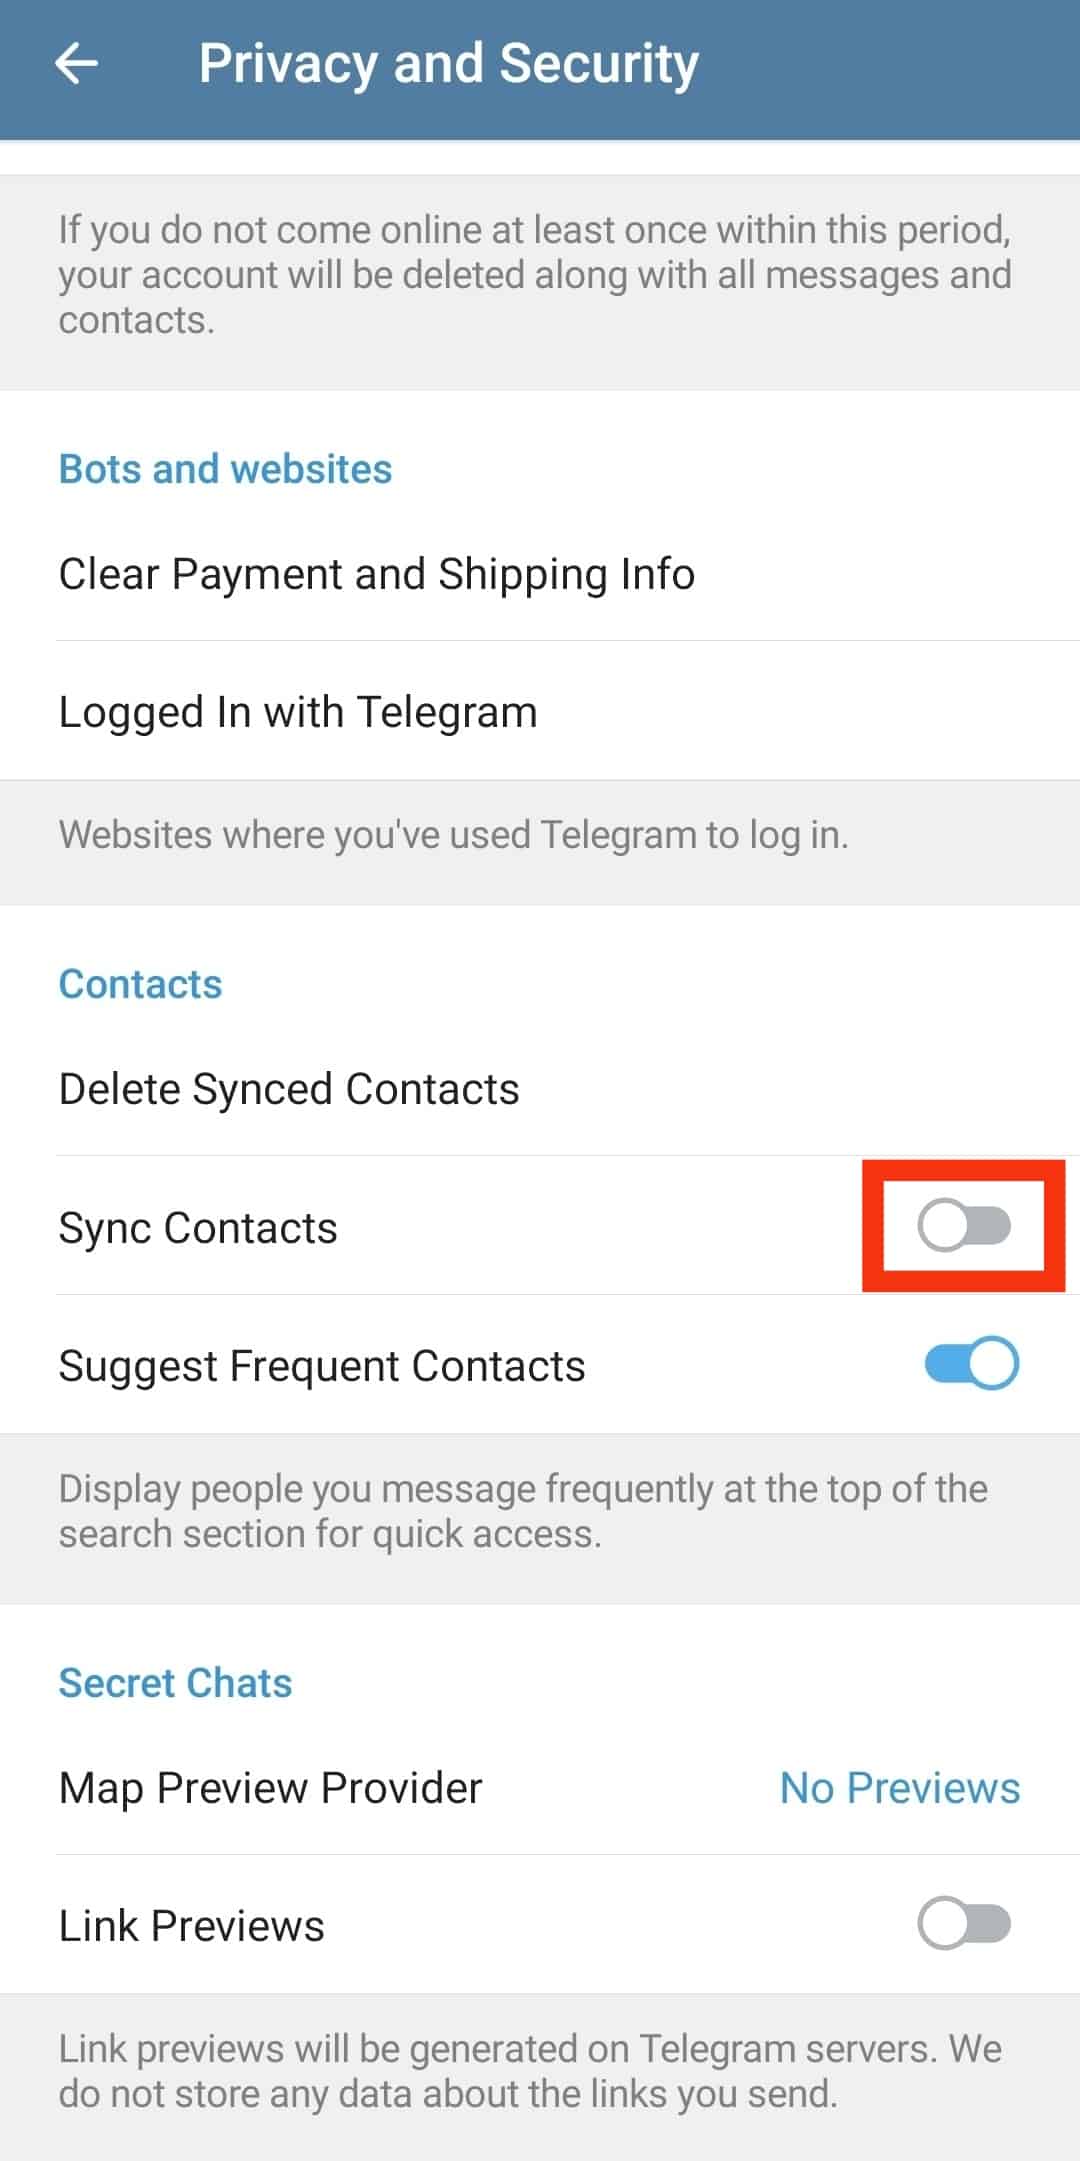 Disable The Sync Contacts Toggle